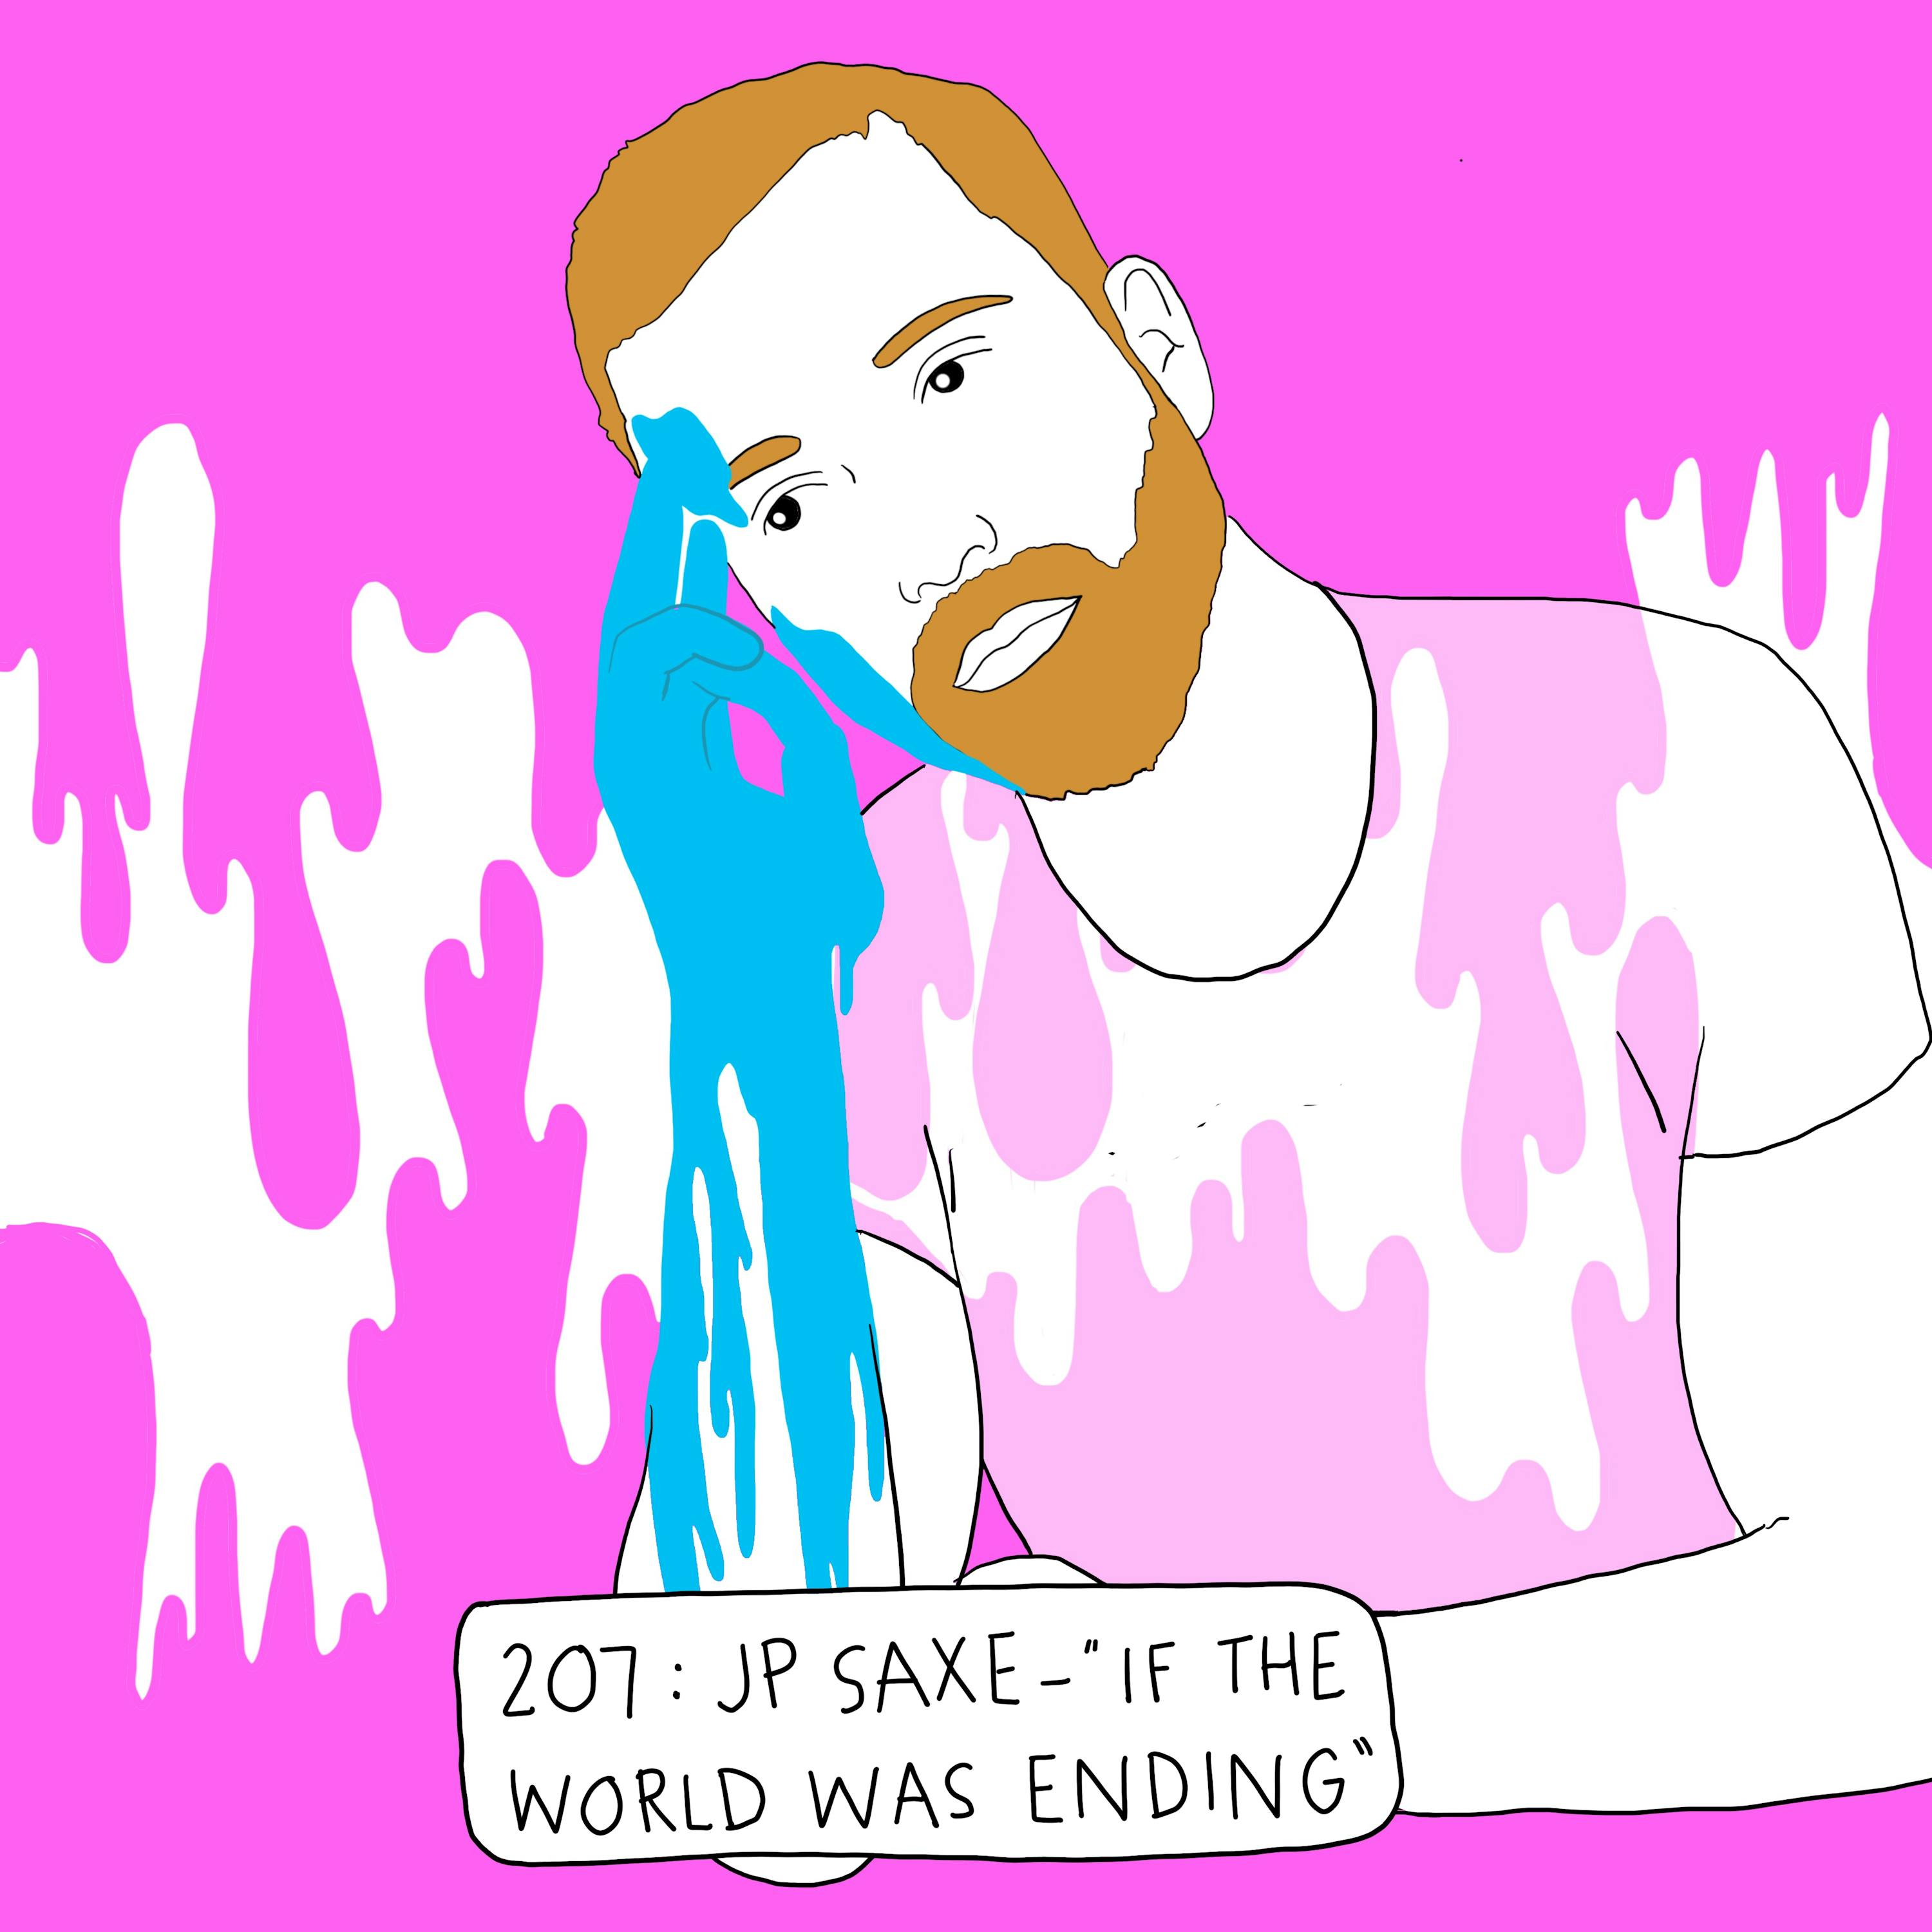 JP Saxe Didn’t Mean for His Grammy Hit ‘If the World Was Ending’ to Be So Literal